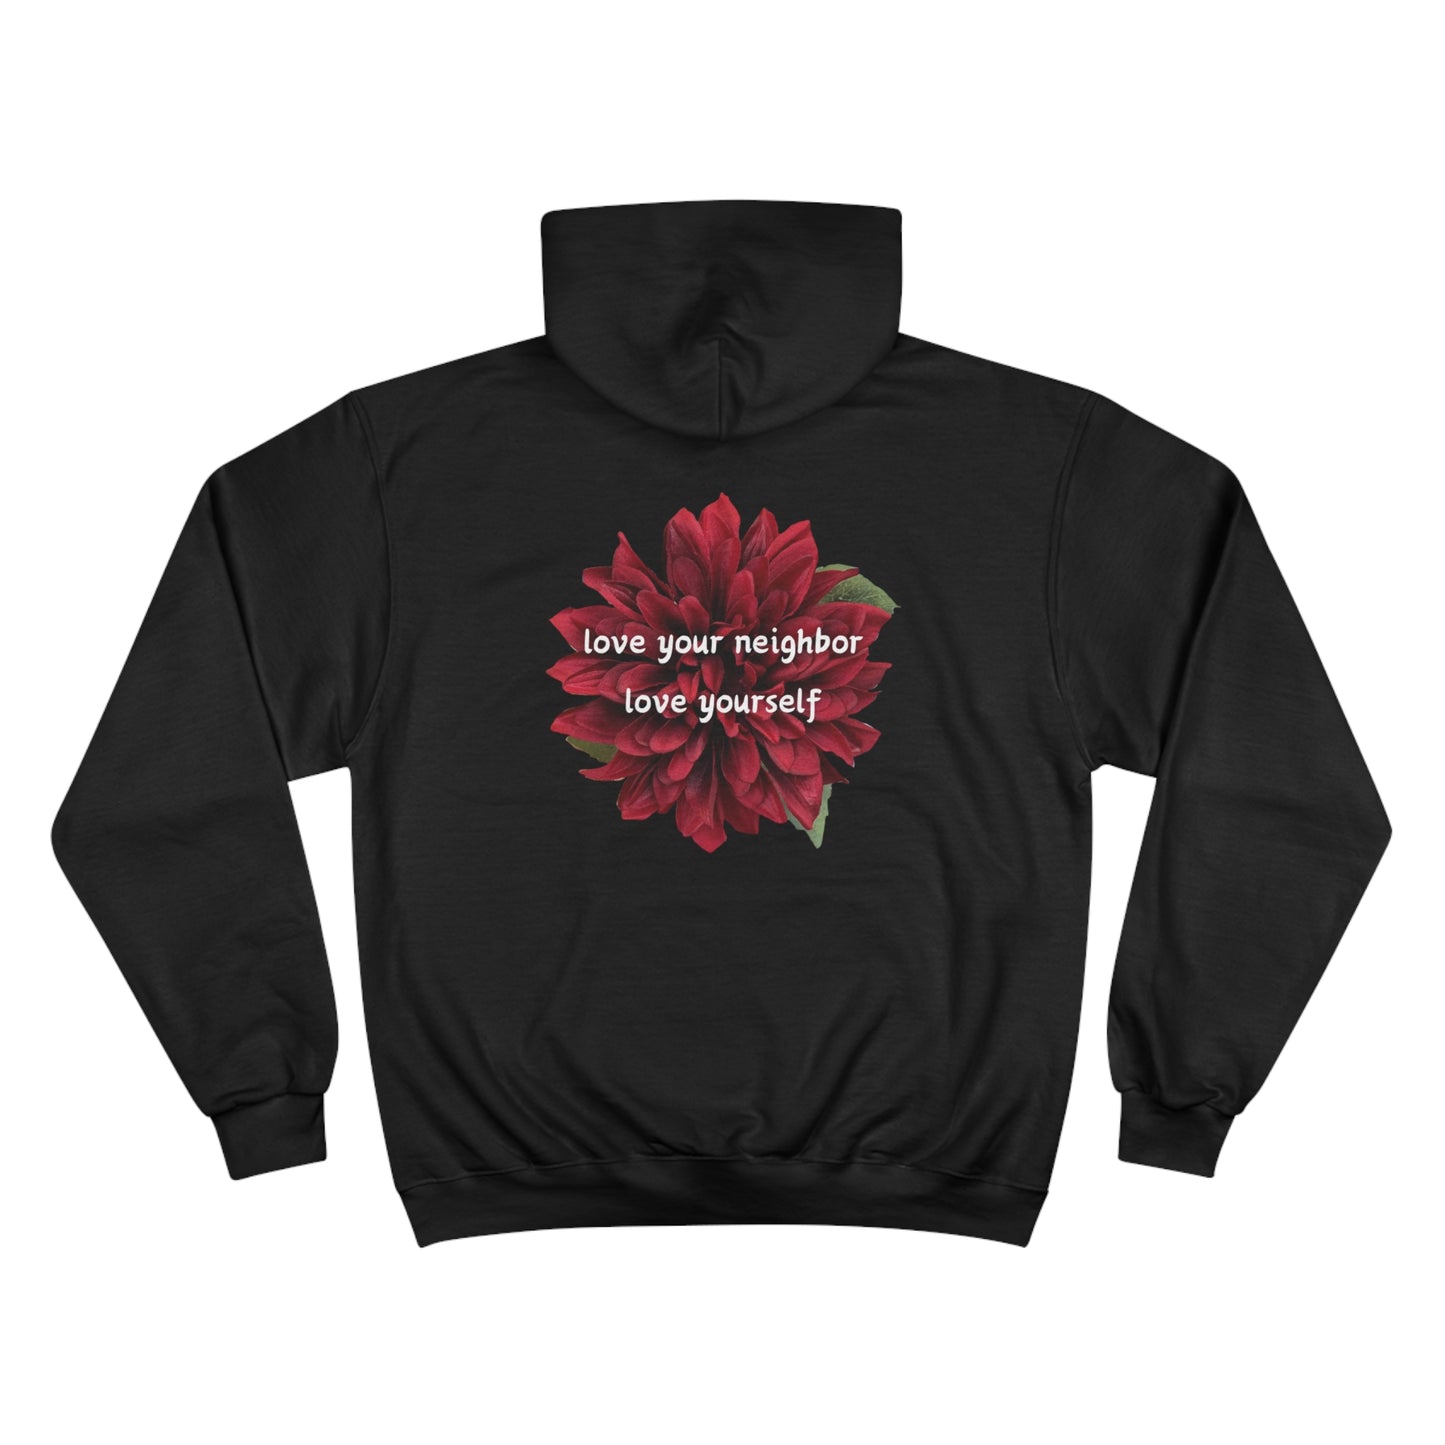 A message of “love your neighbor love yourself” on top of a gorgeous red flower on this very comfortable Champion Hoodie.